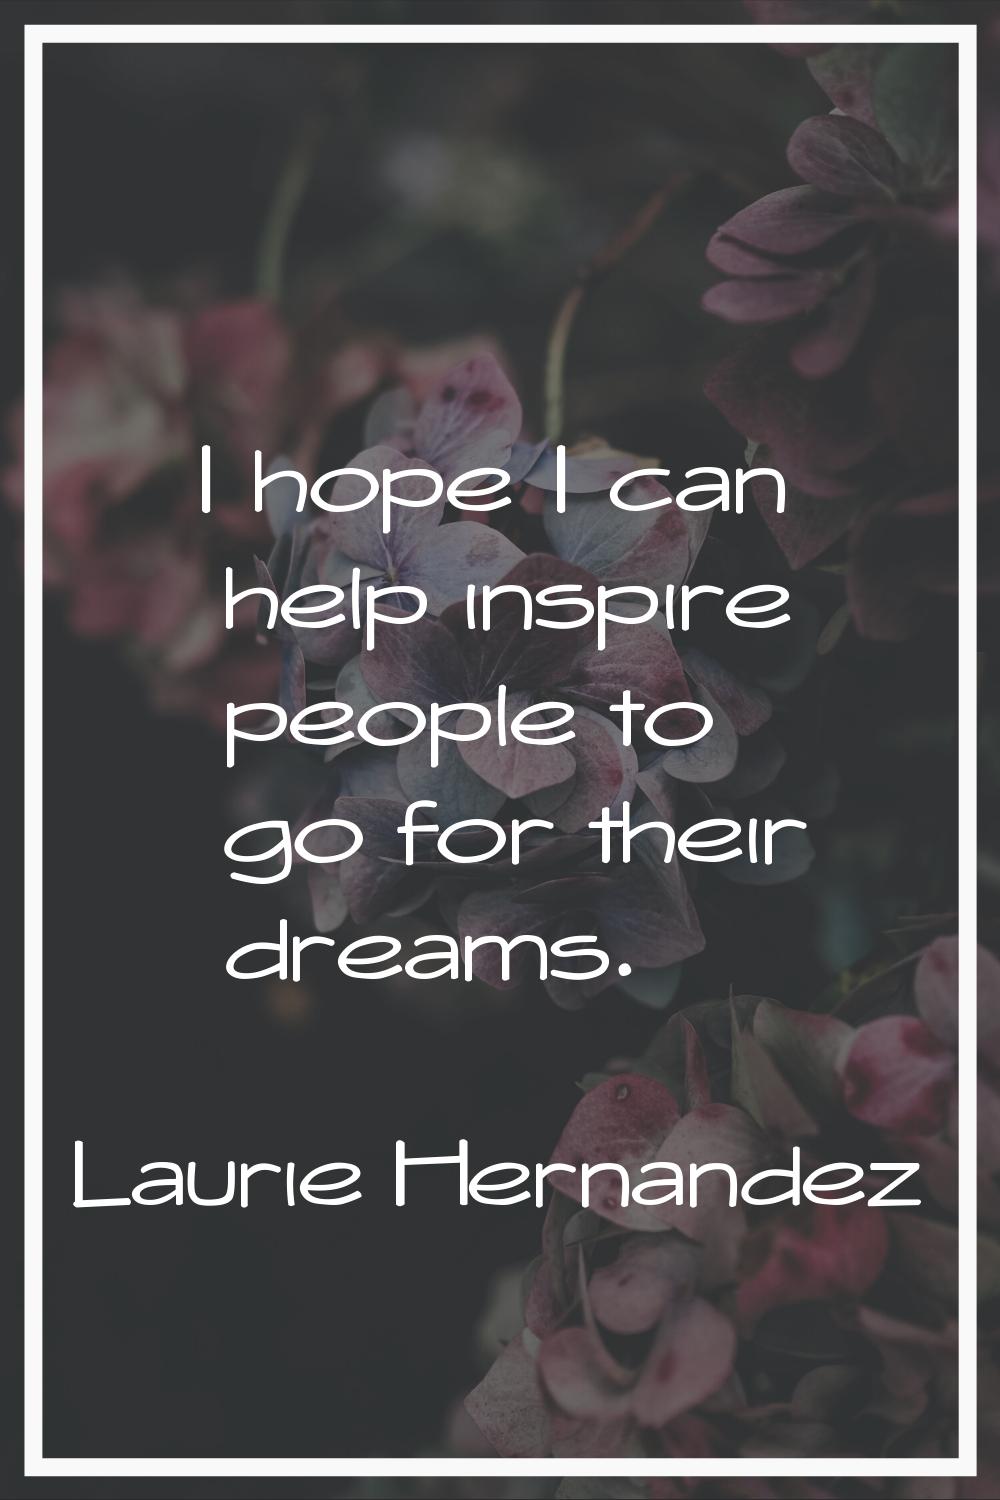 I hope I can help inspire people to go for their dreams.